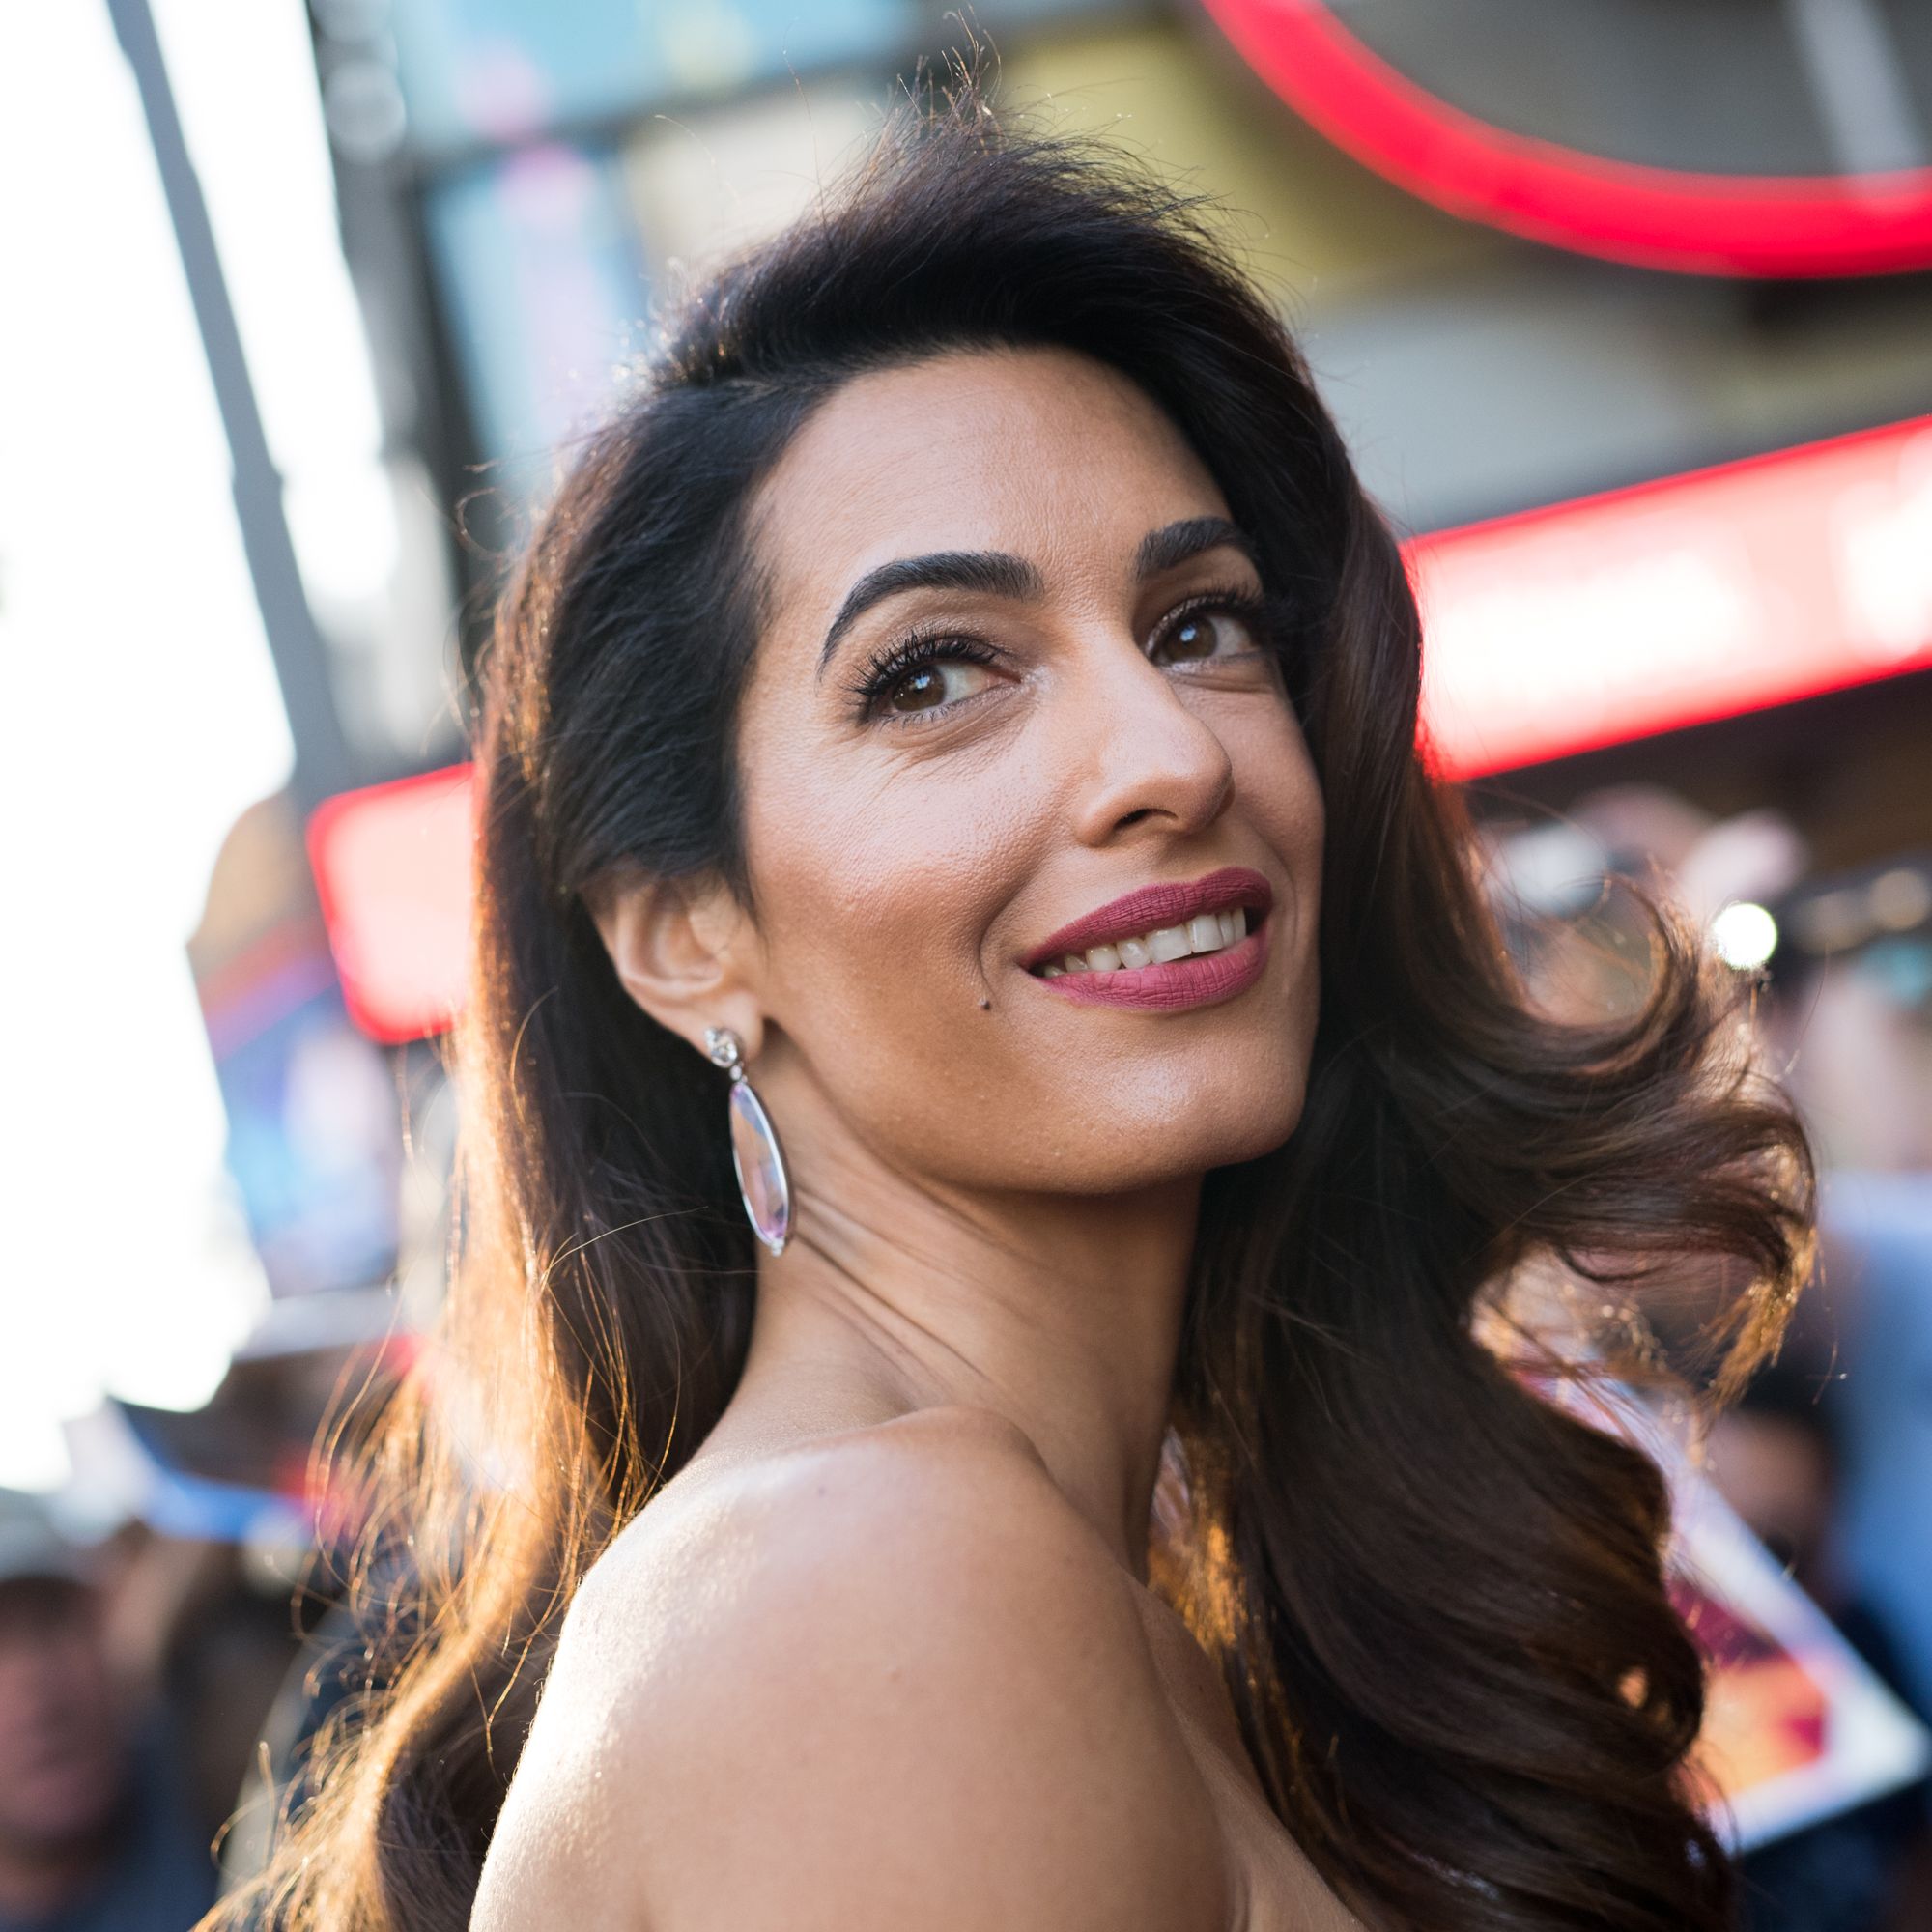 Amal clooney - amal clooney human rights lawyer 